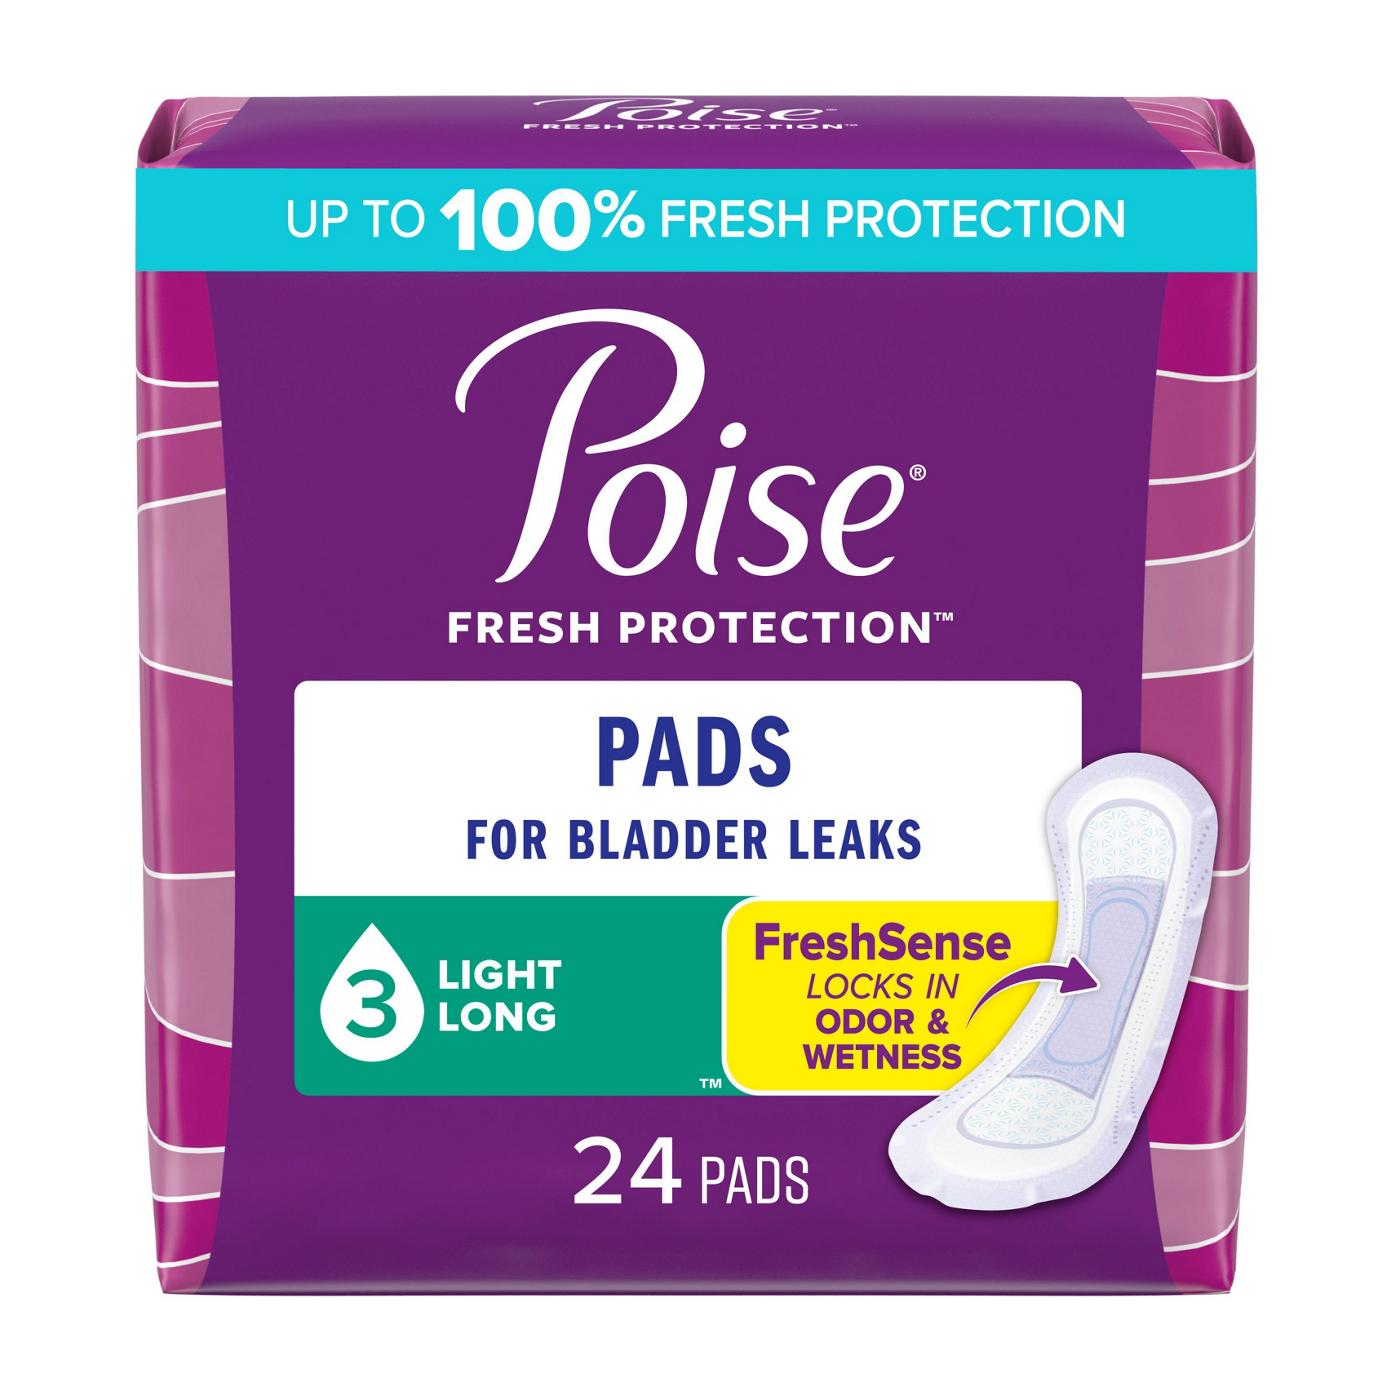 Poise Long Incontinence & Postpartum Pads - Light; image 1 of 7